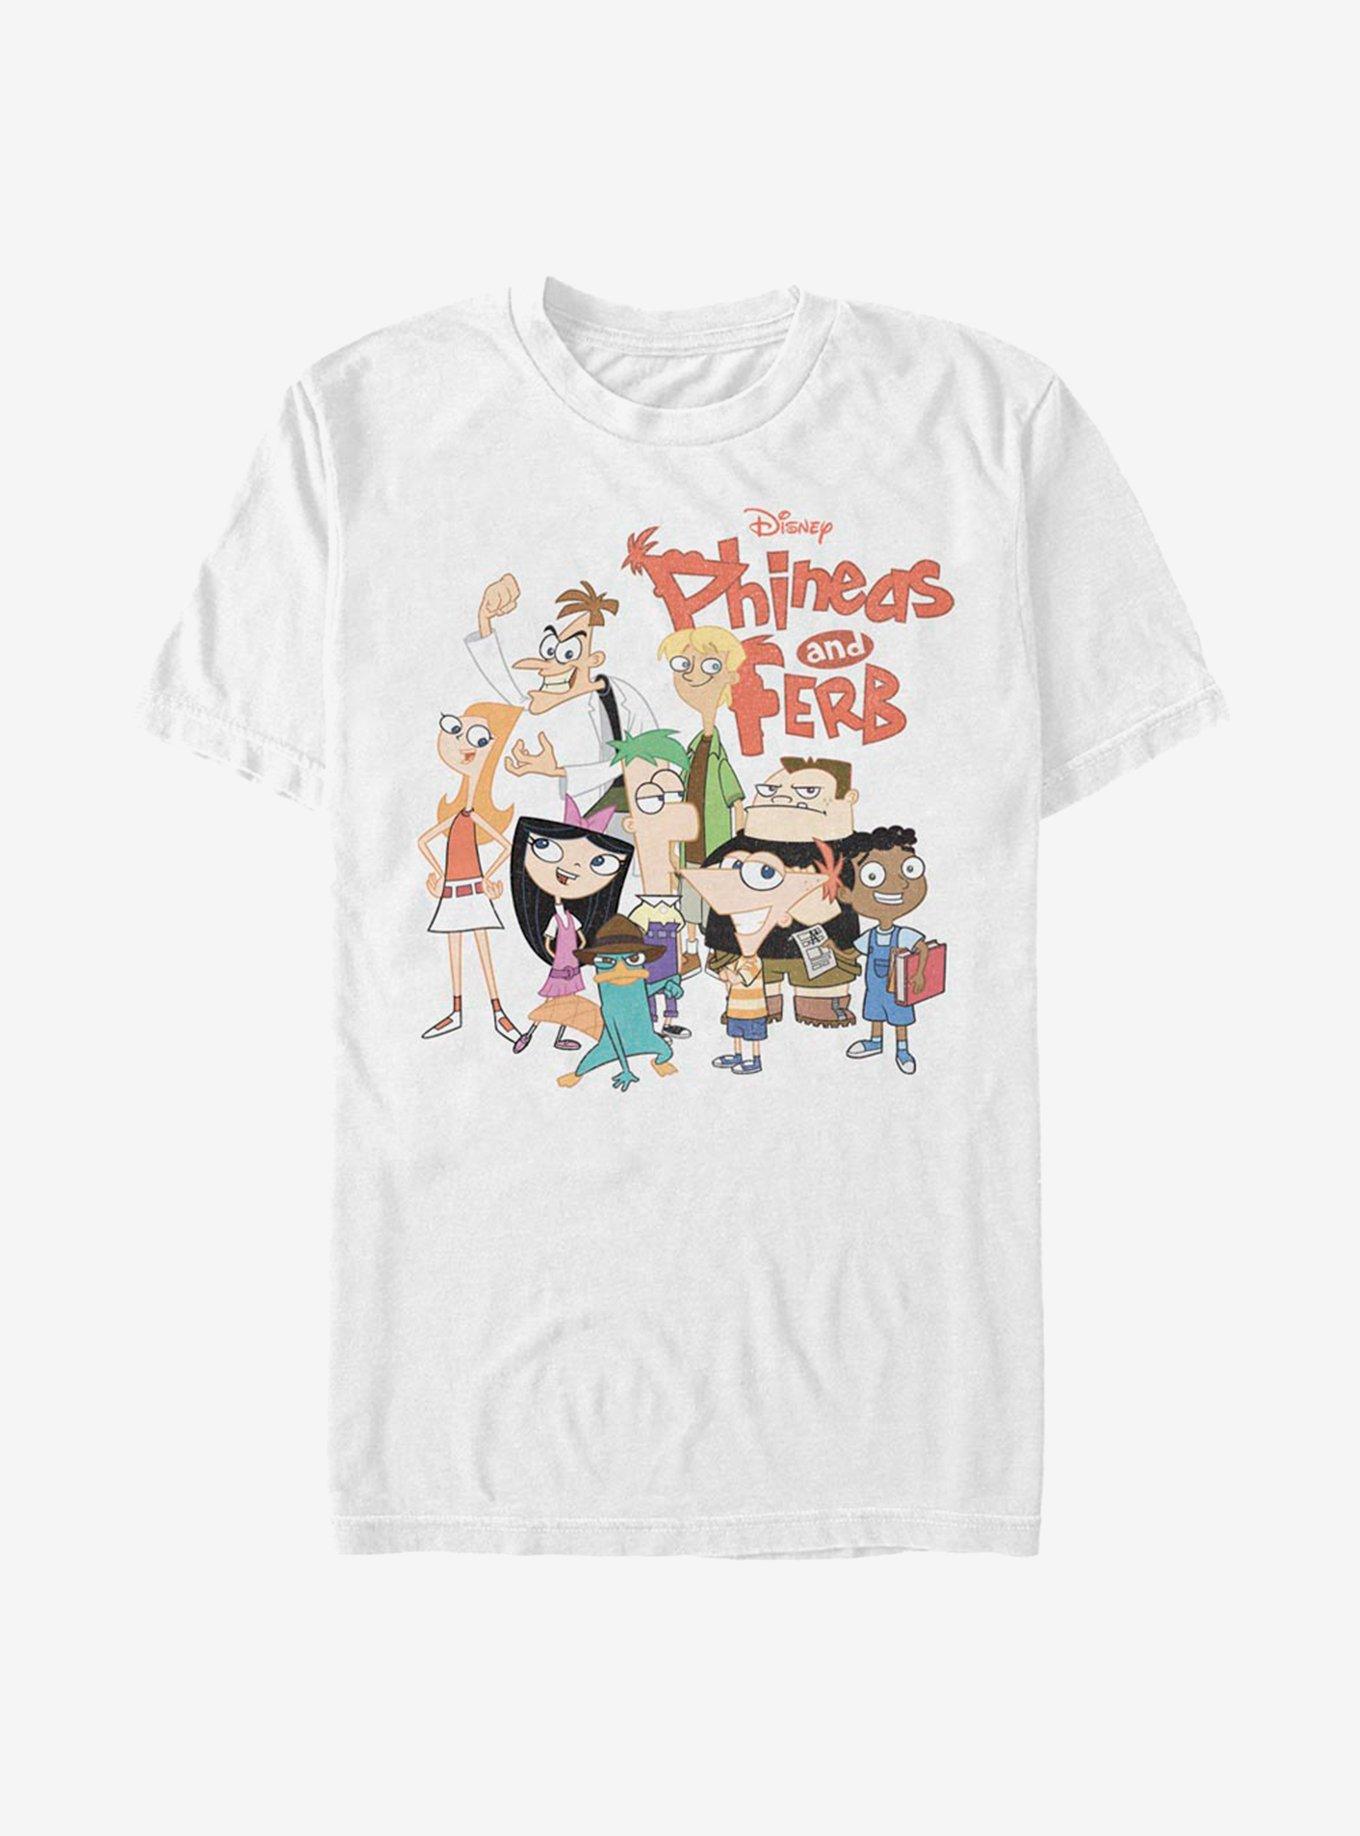 Disney Phineas And Ferb The Group T-Shirt, WHITE, hi-res